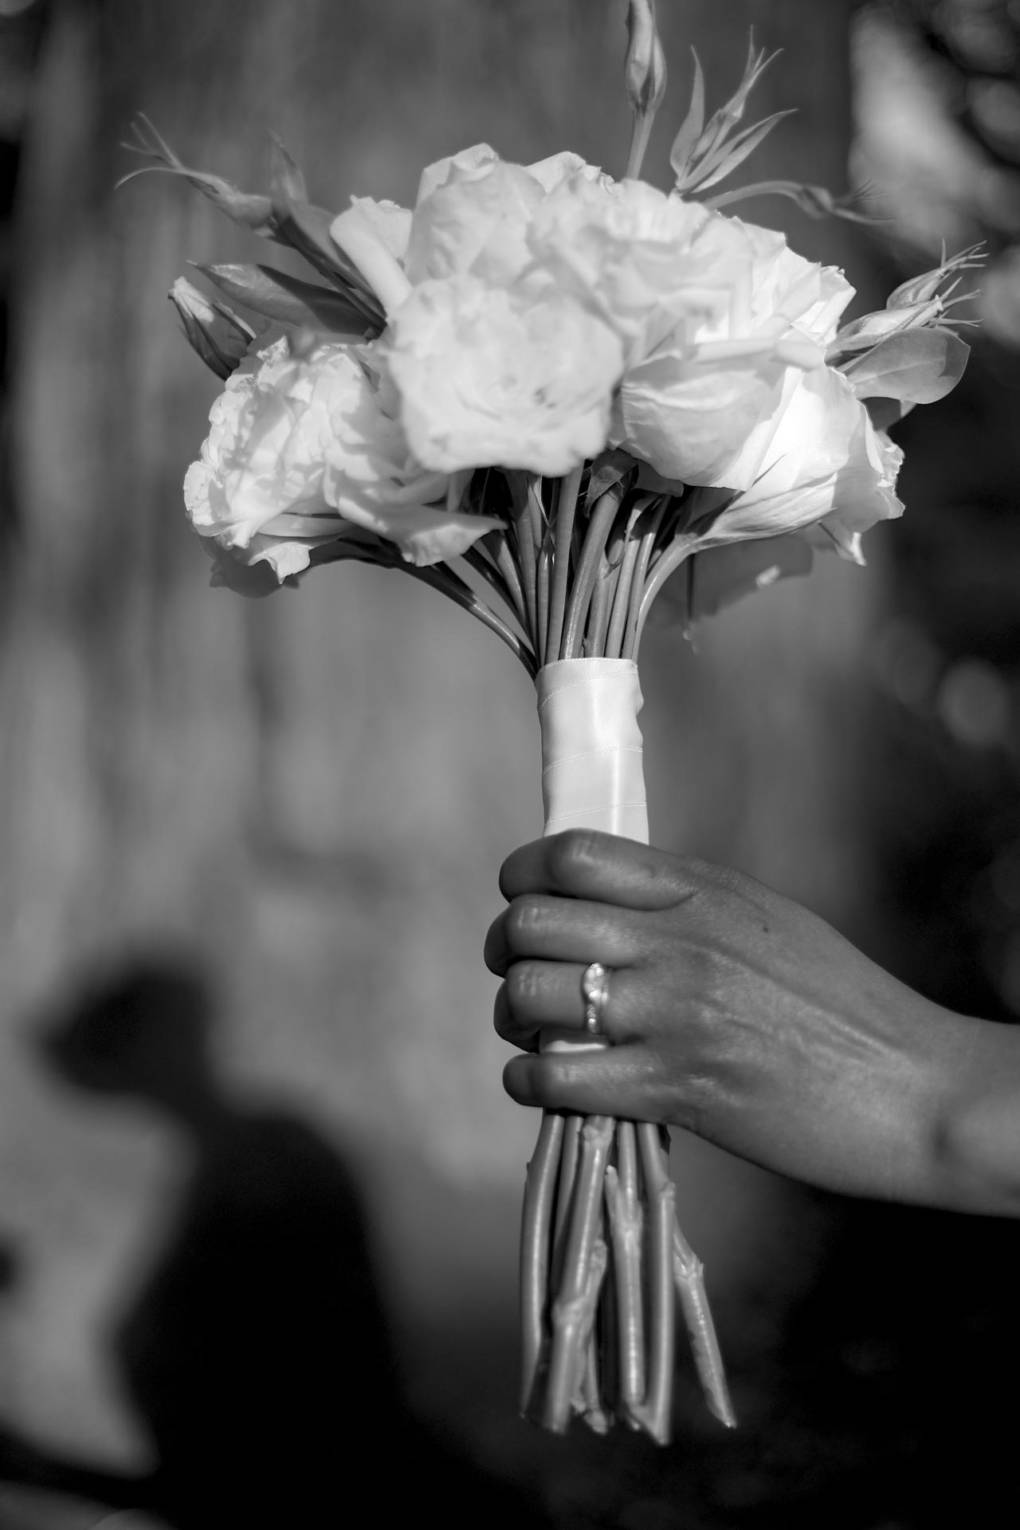 Dalila’s hand, on the day of her wedding. Photo taken just last week.